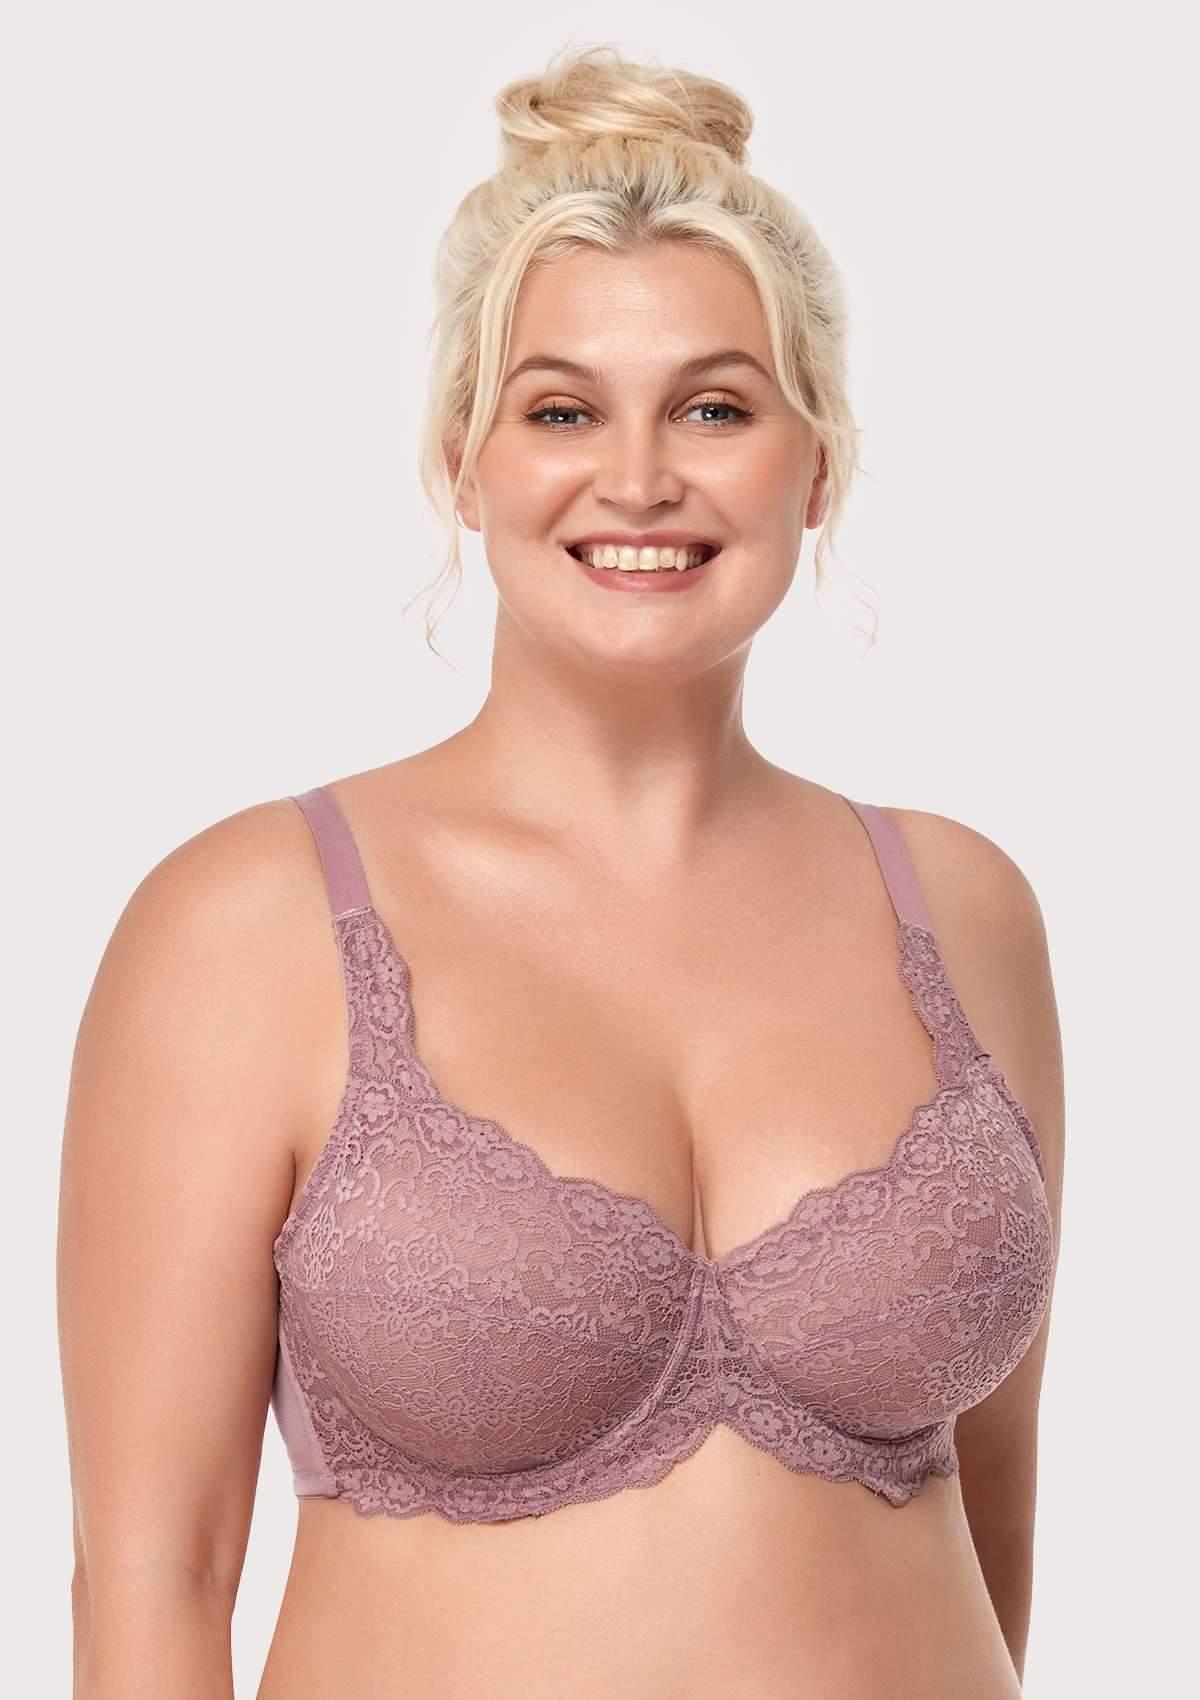 HSIA All-Over Floral Lace Unlined Bra: Minimizer Bra For Heavy Breasts - Purple / 36 / D